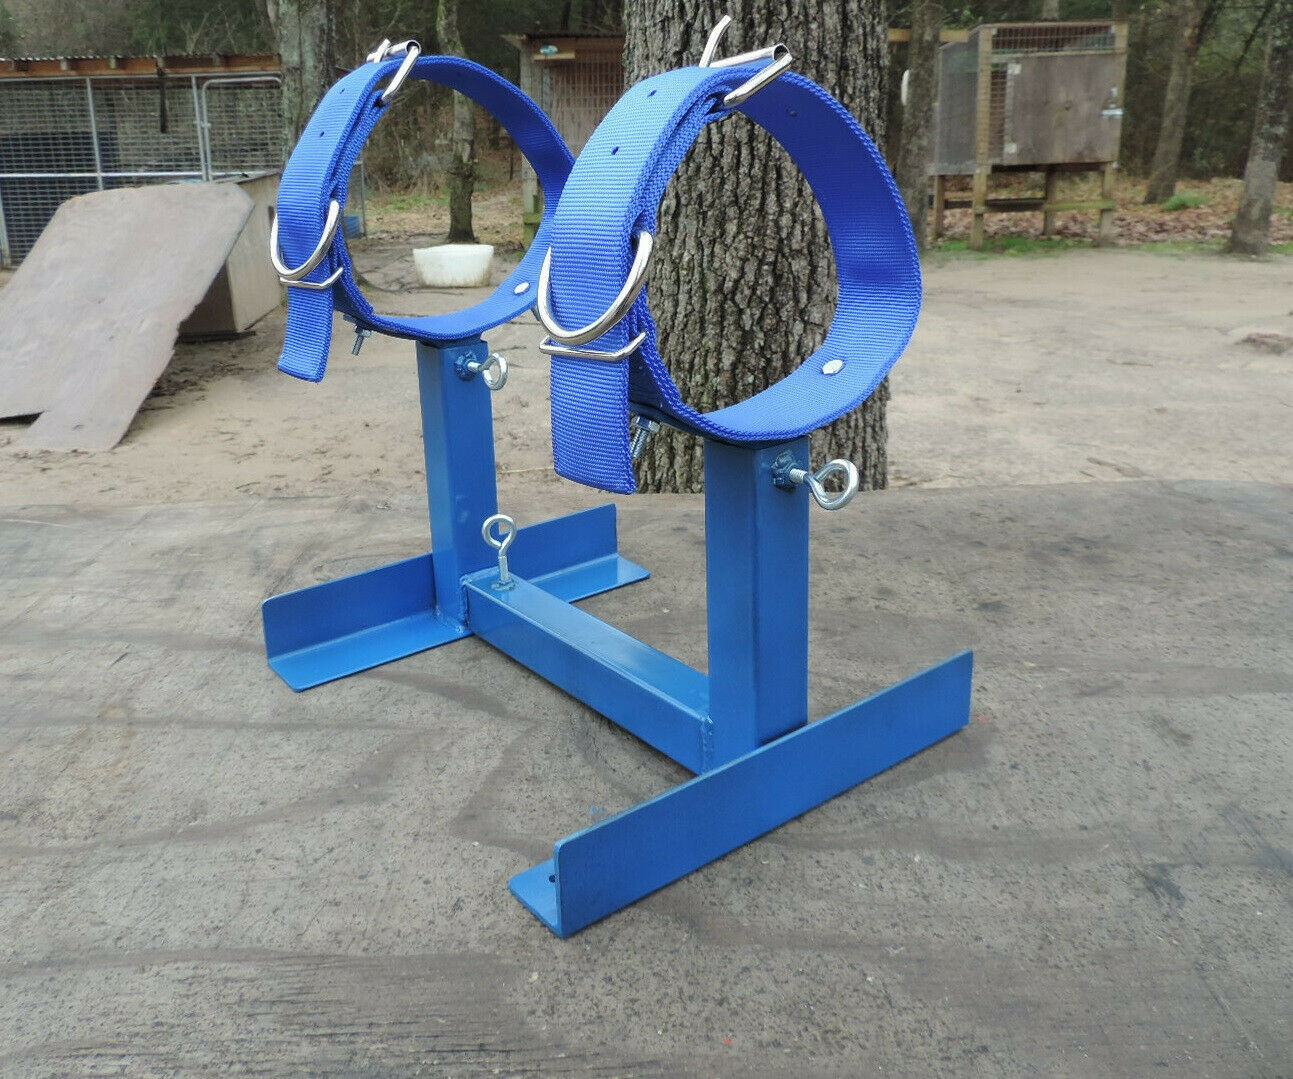 Fully Adjustable Grooming / Breeding Stand W Collars!